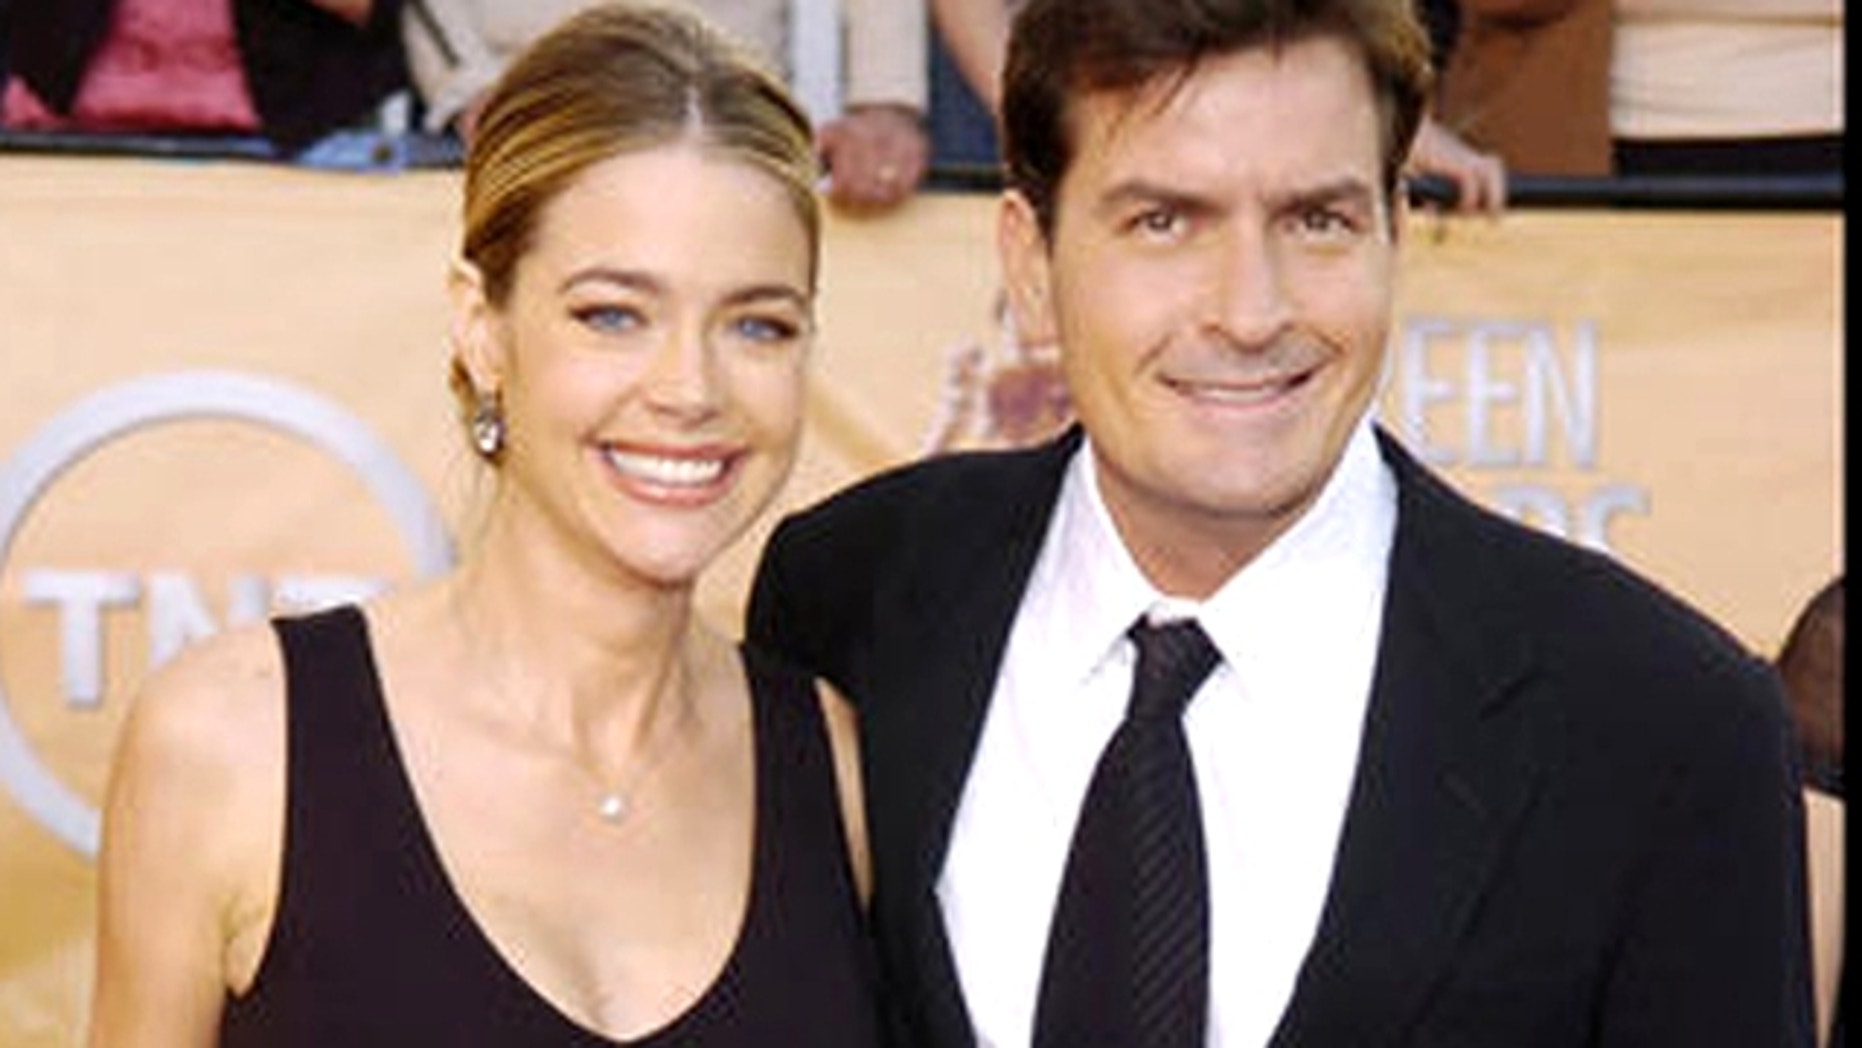 Charlie Sheen Spotted Arm In Arm With Ex Wife Denise Richards Following Dinner Date Report Says 